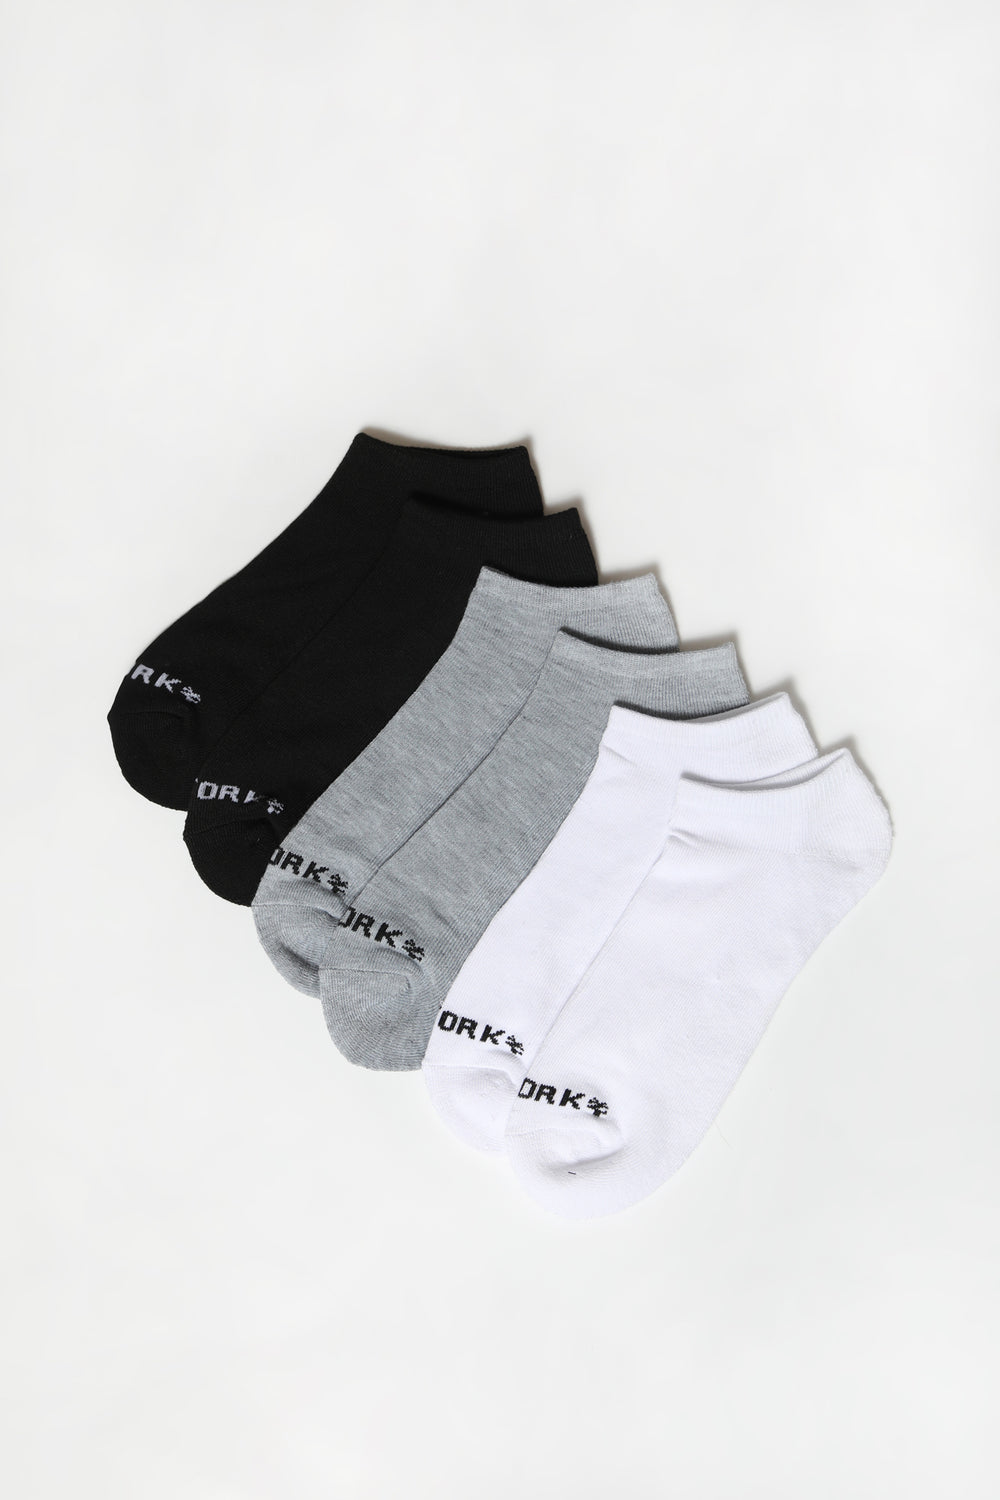 Zoo York Mens Solid No Show Socks 6-Pack Black with White